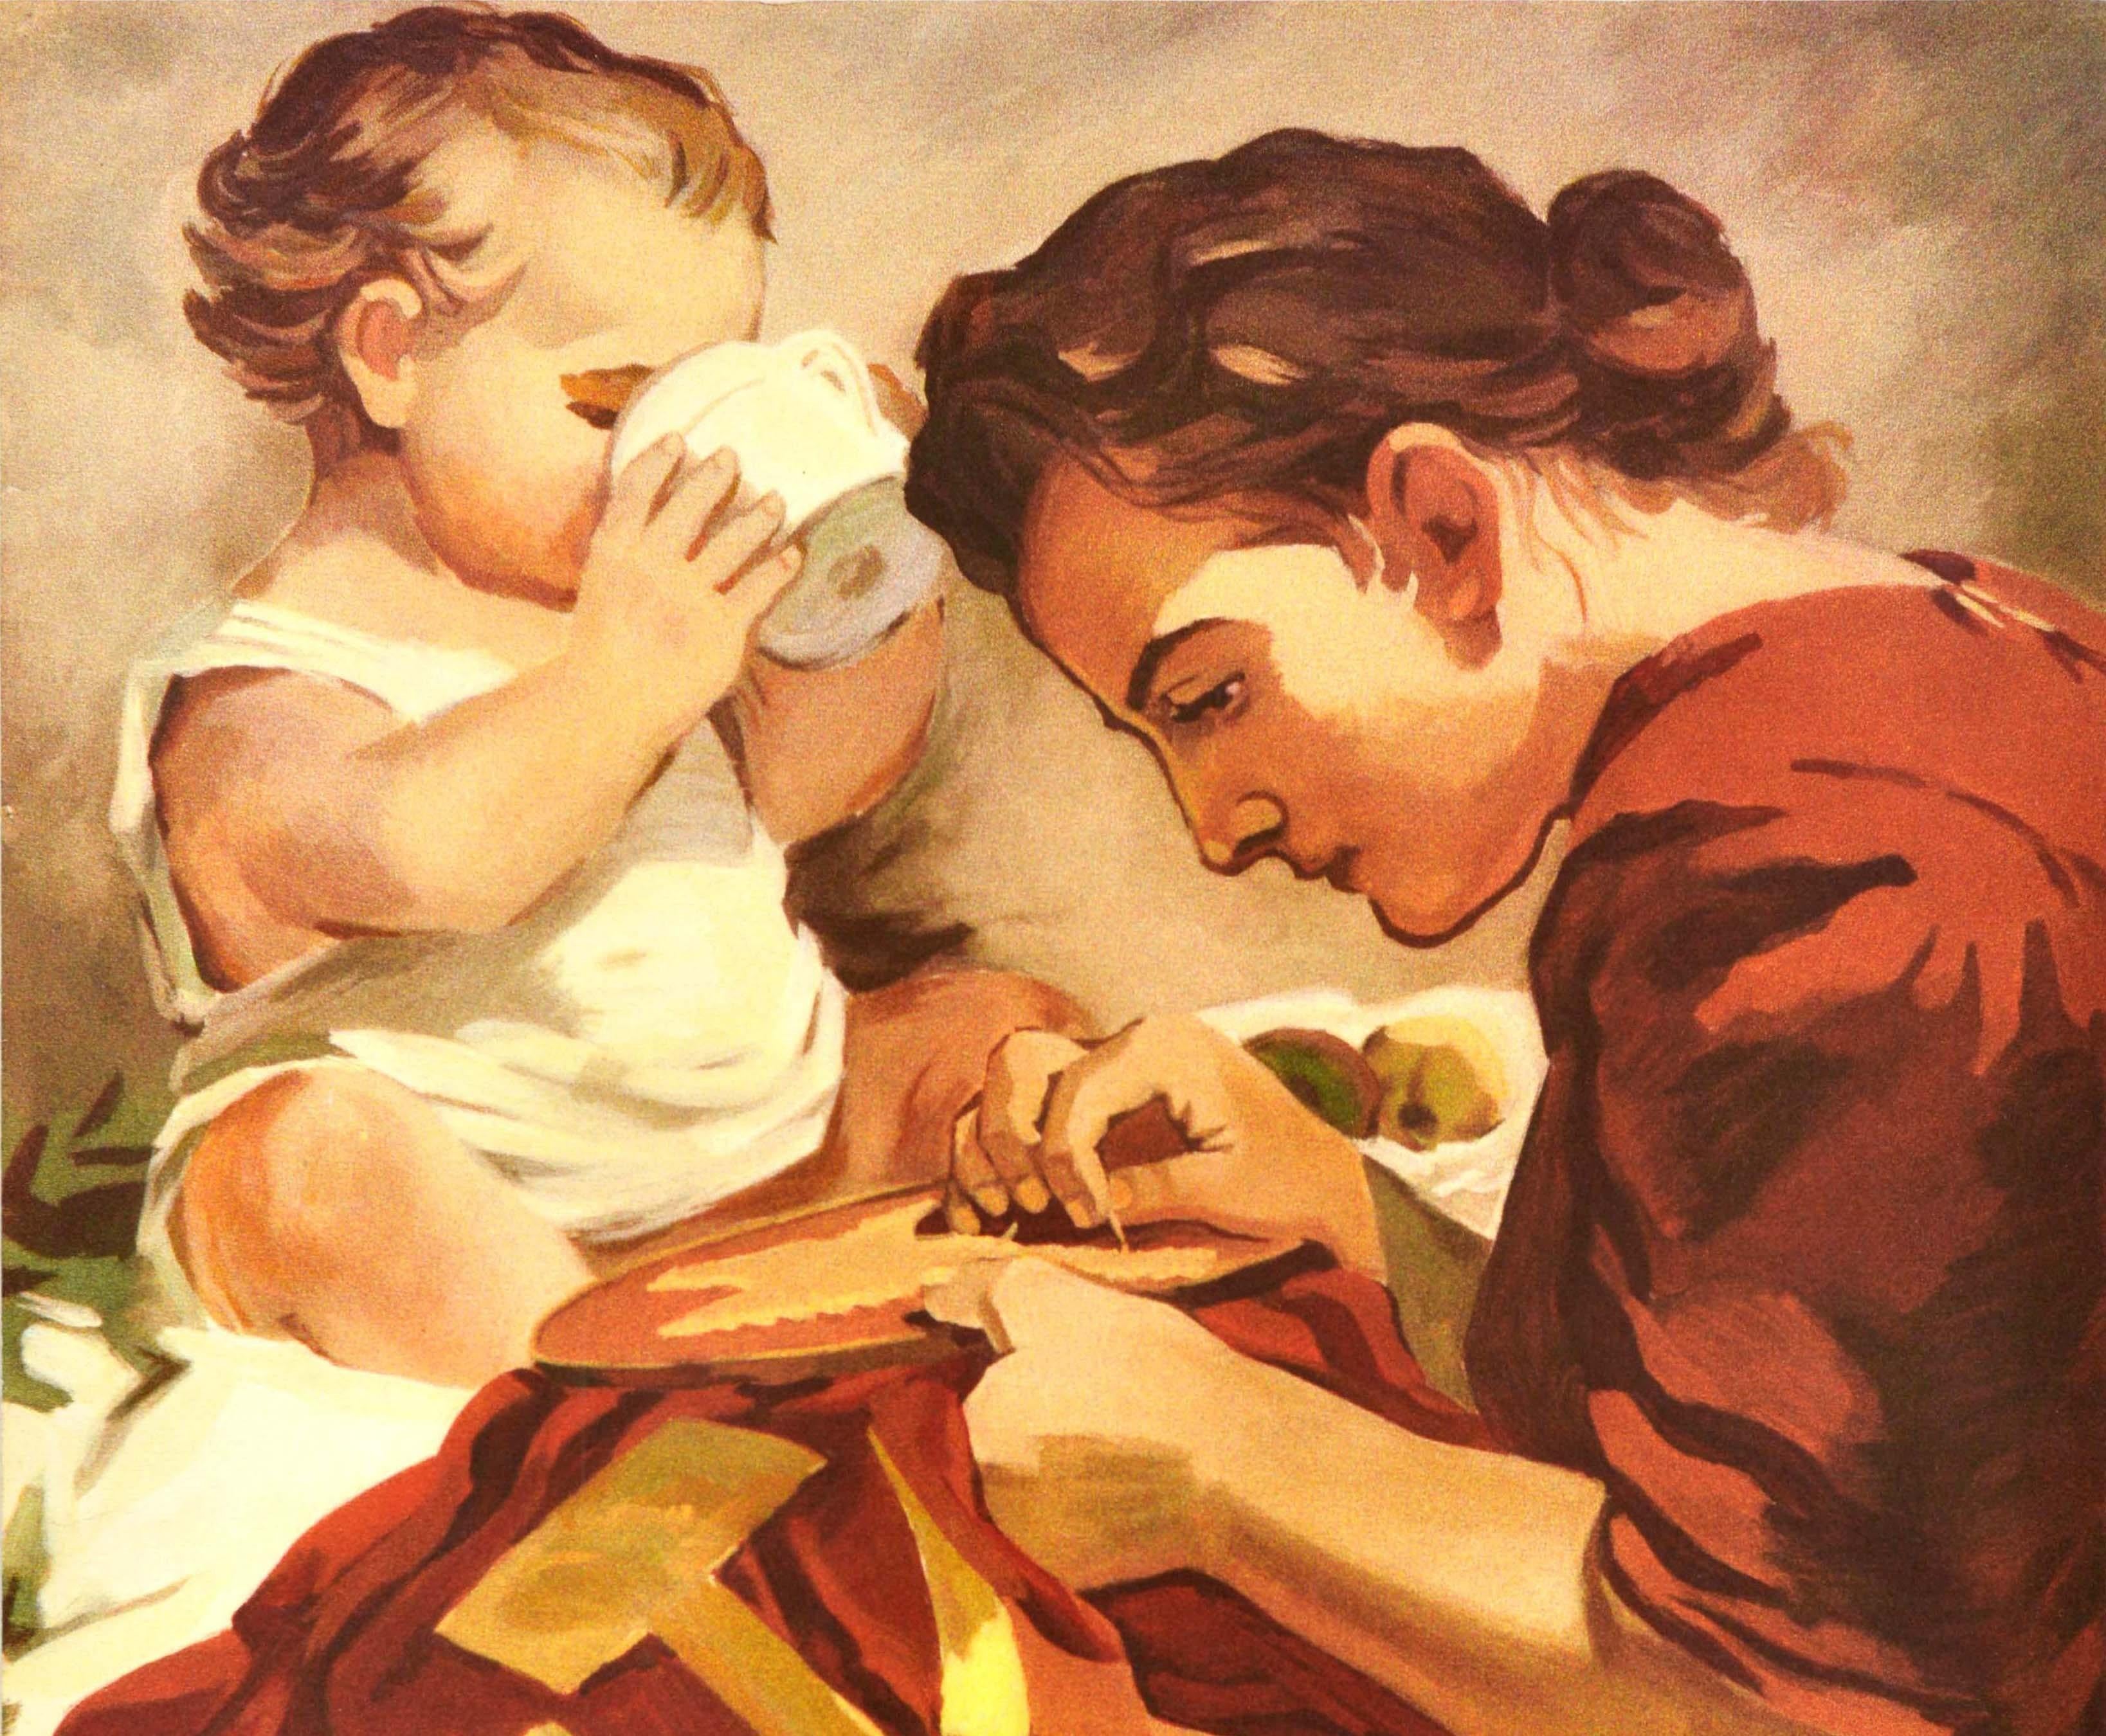 Original vintage Soviet propaganda poster - Long Live Peace! - featuring artwork showing a lady holding a sewing needle and embroidering a red flag with the title text and yellow hammer and sickle emblem on it, a young child sitting next to her